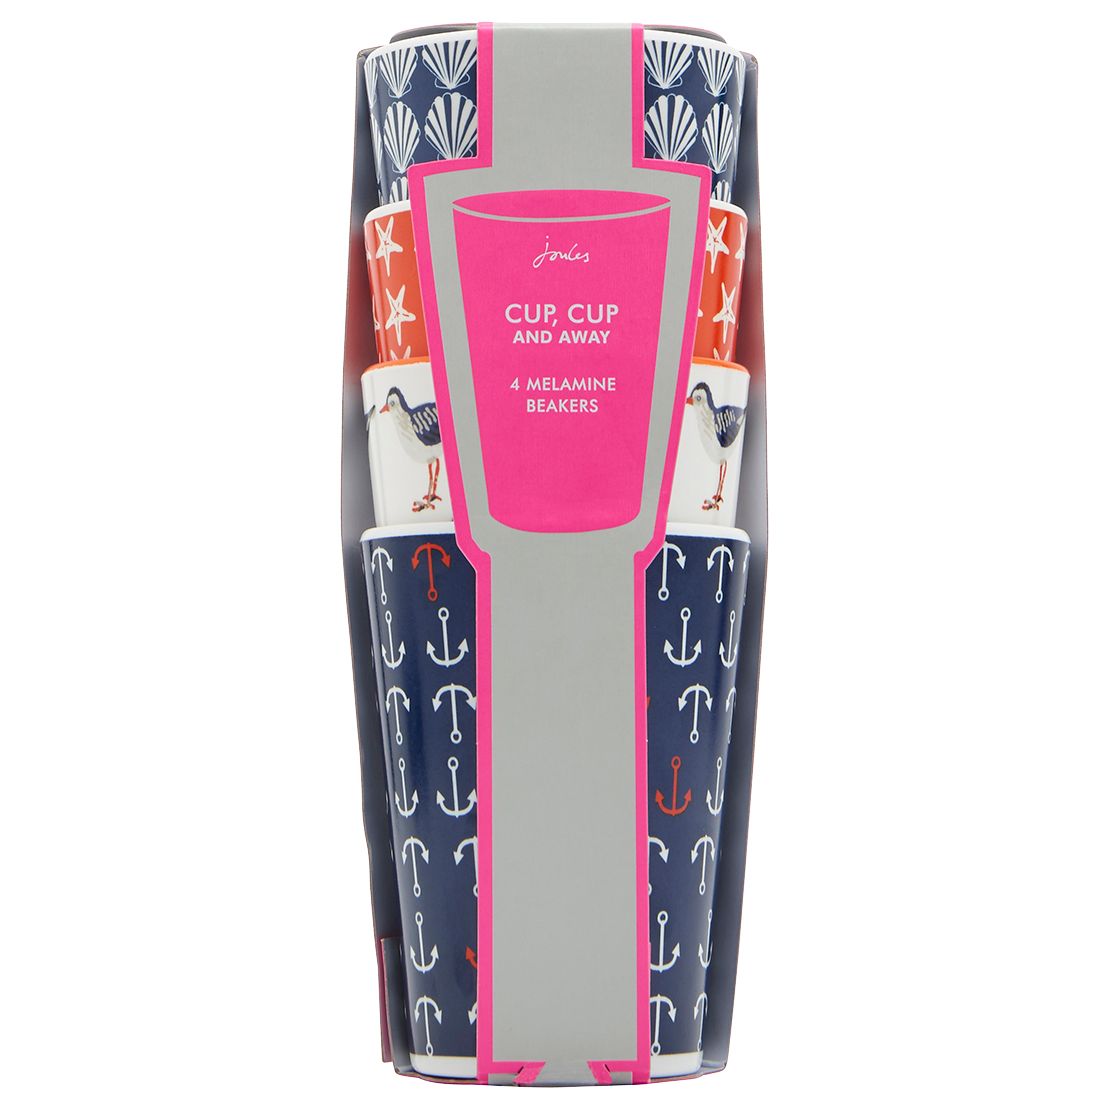 Buy Joules Cup, Cup and Away Melamine Beakers, Set of 4 Online at johnlewis.com